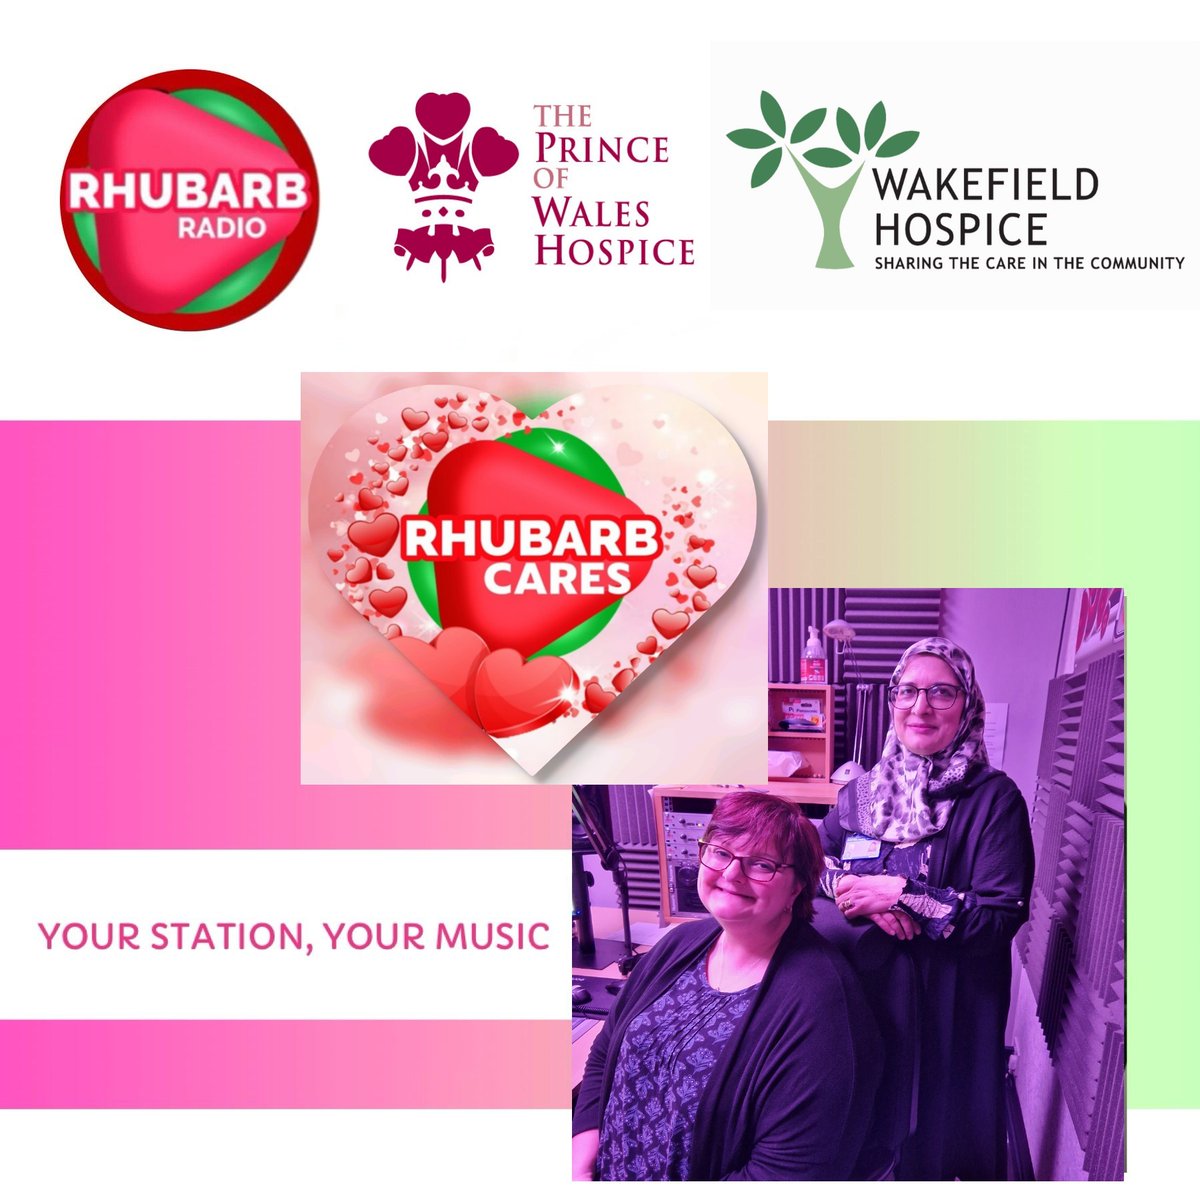 🎙 Rhubarb Cares on Rhubarb Radio this Thurs at 8pm, Dave Adams welcomes Farzana Aziz from Wakefield Hospice, and Jo Dunford from The Prince of Wales Hospice, to talk about the incredible work they do supporting patients, families, and the community. @WfldHospice @pwhospice